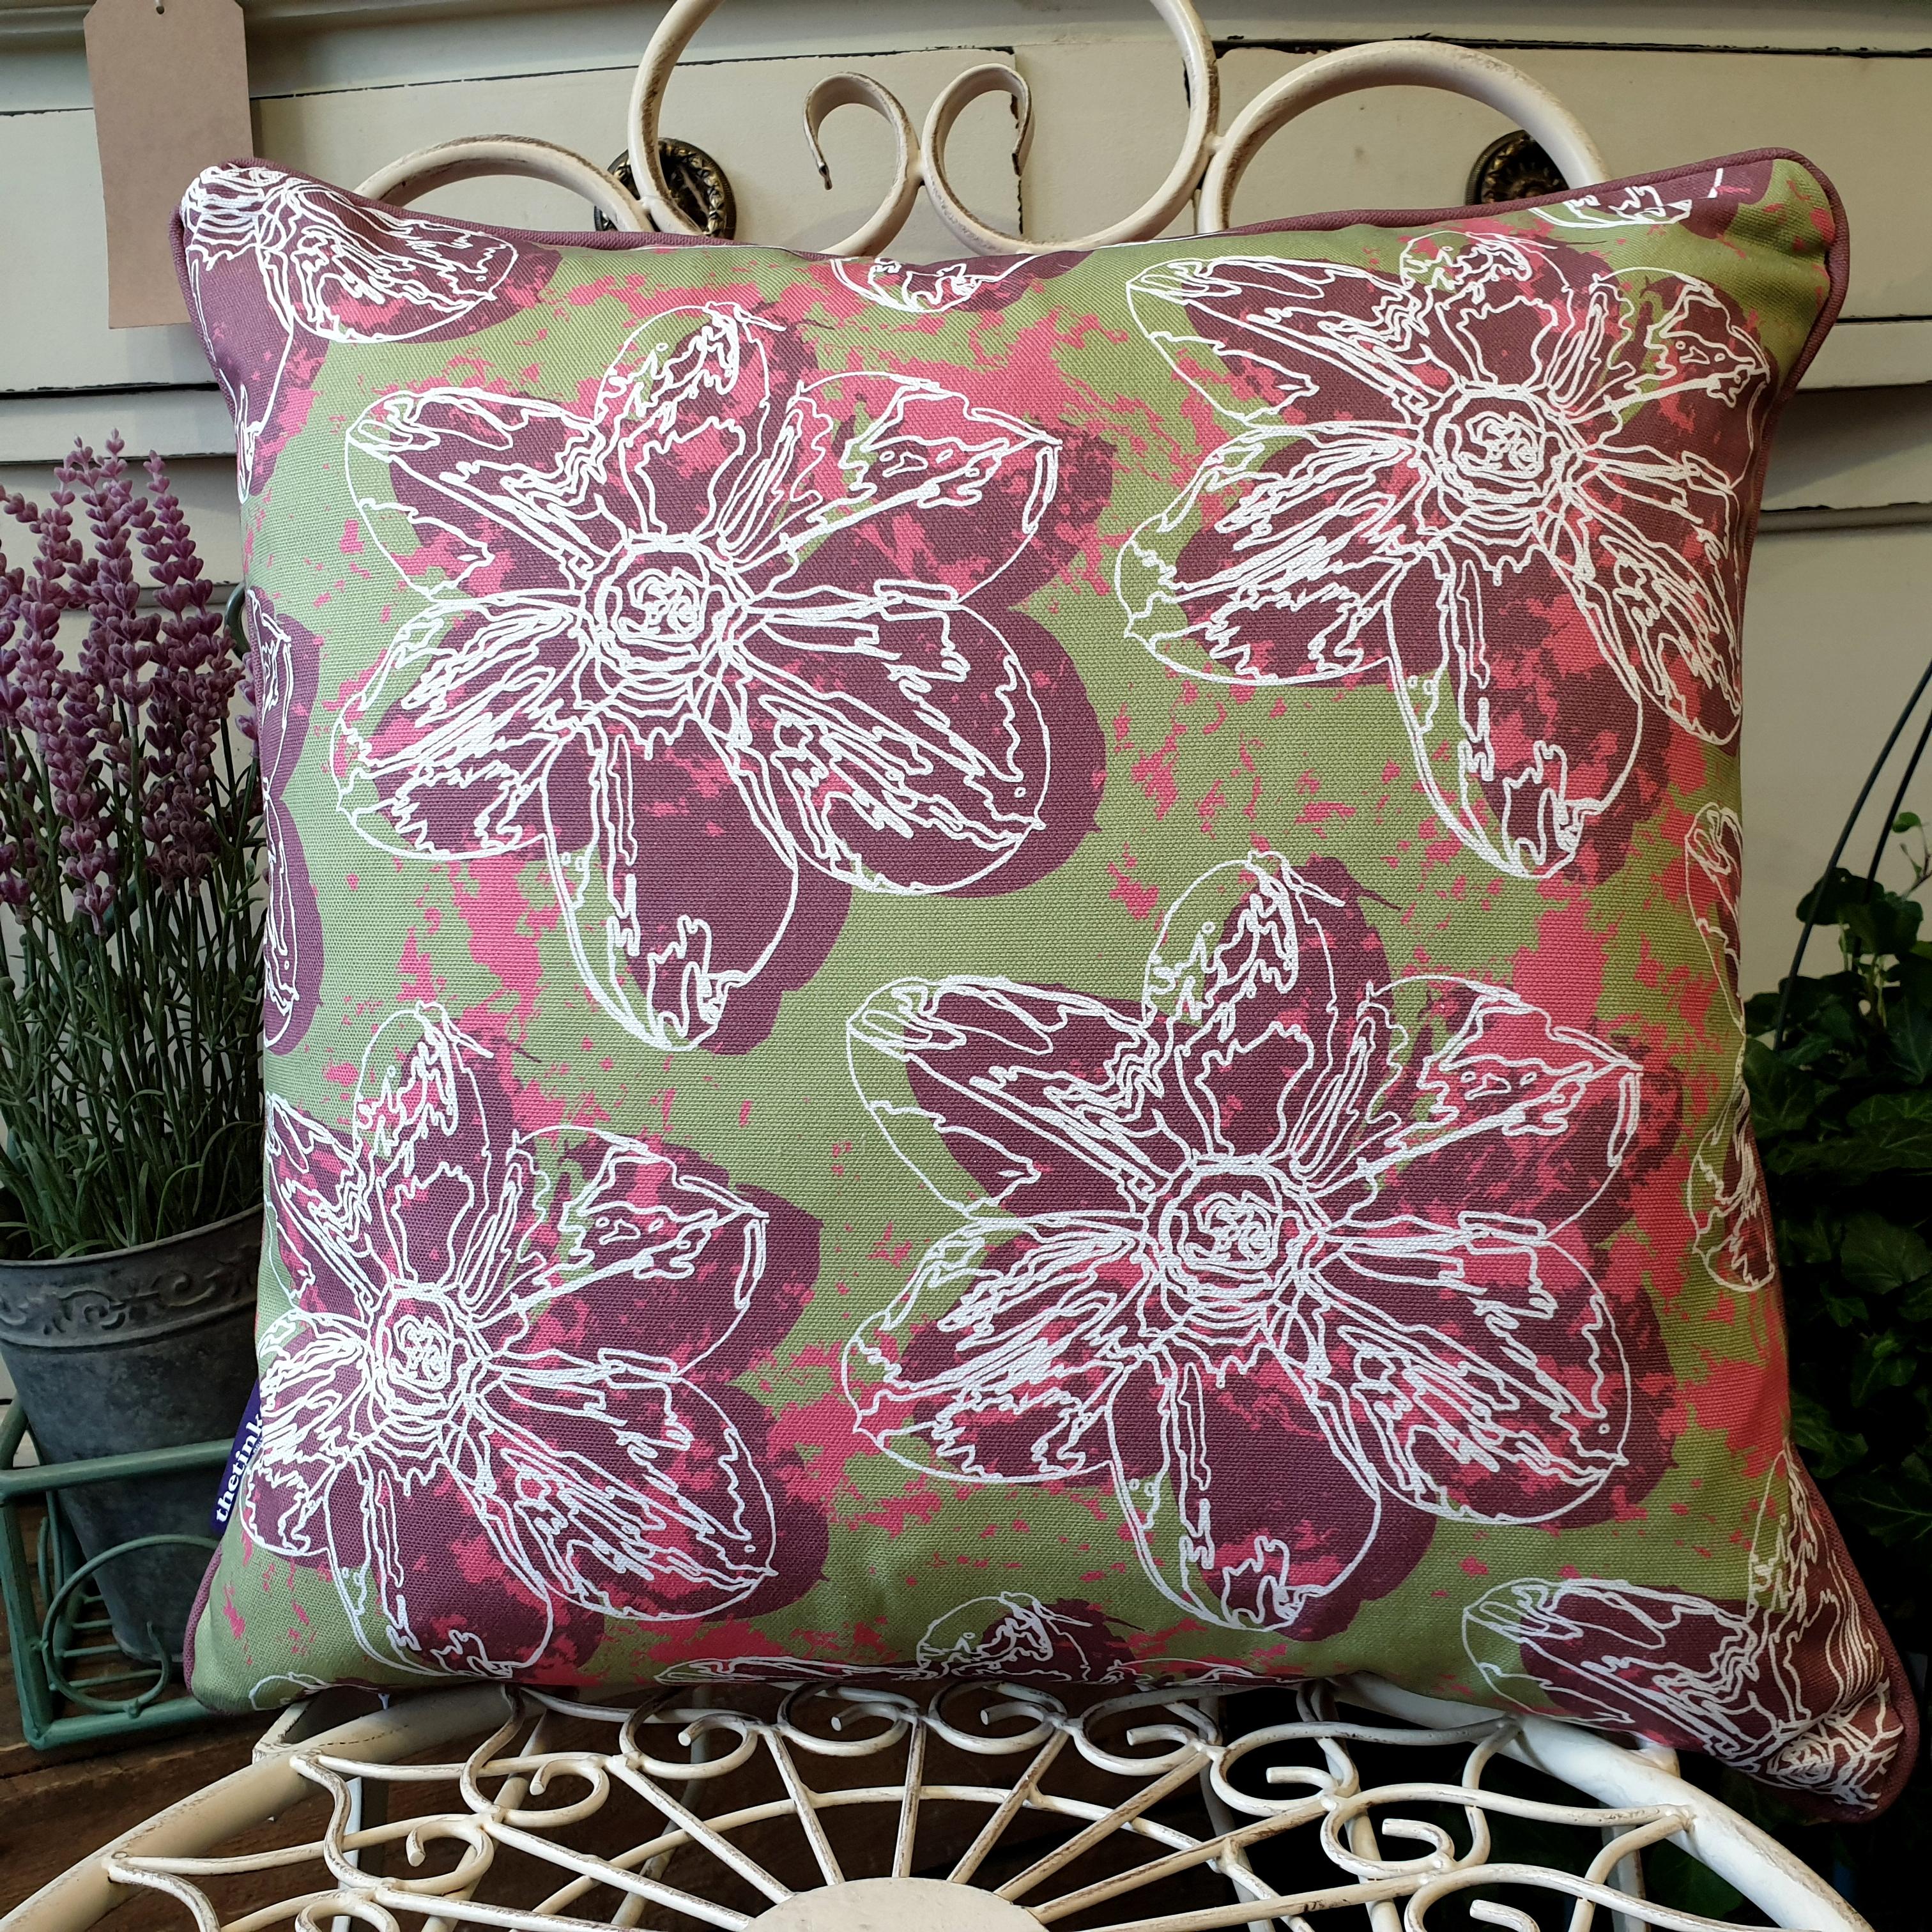 Double-sided 45cm square Flower Splash cushion designed by thetinkan. Dark red narcissus flower and dark red piping with white traced outline set within an olive green background with salmon pink paint splashes. Available with an optional luxury cushion inner pad. VIEW PRODUCT >>